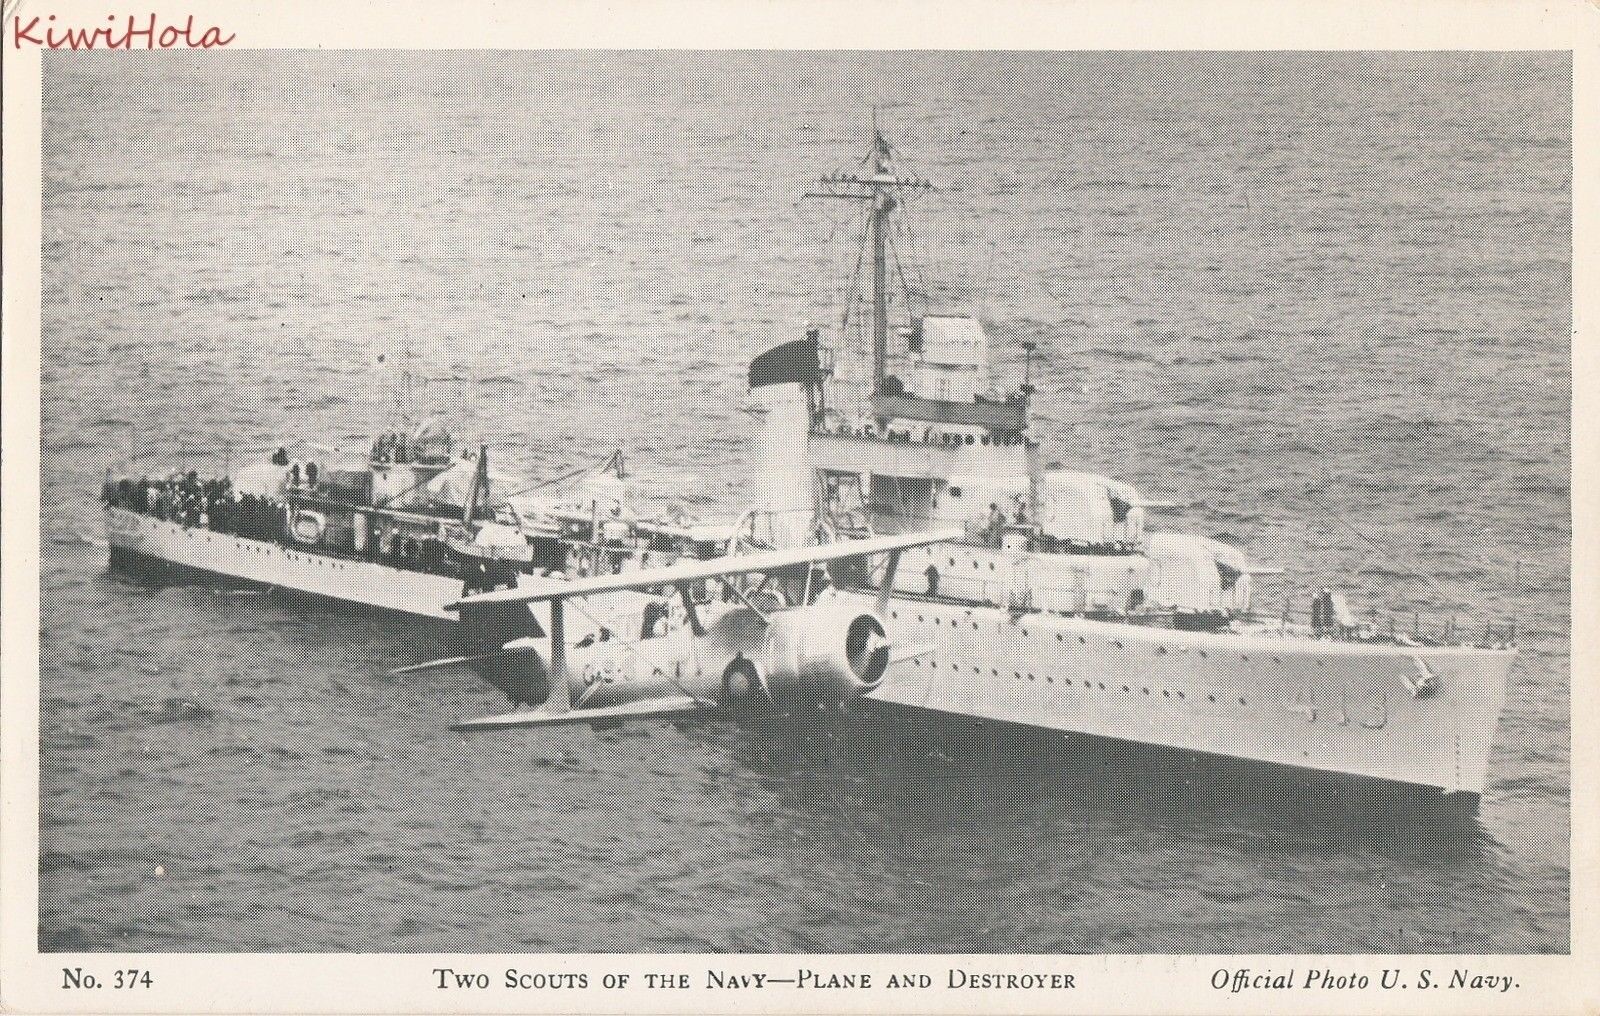 Postcard Two Scouts of the Navy Plane and Destroyer